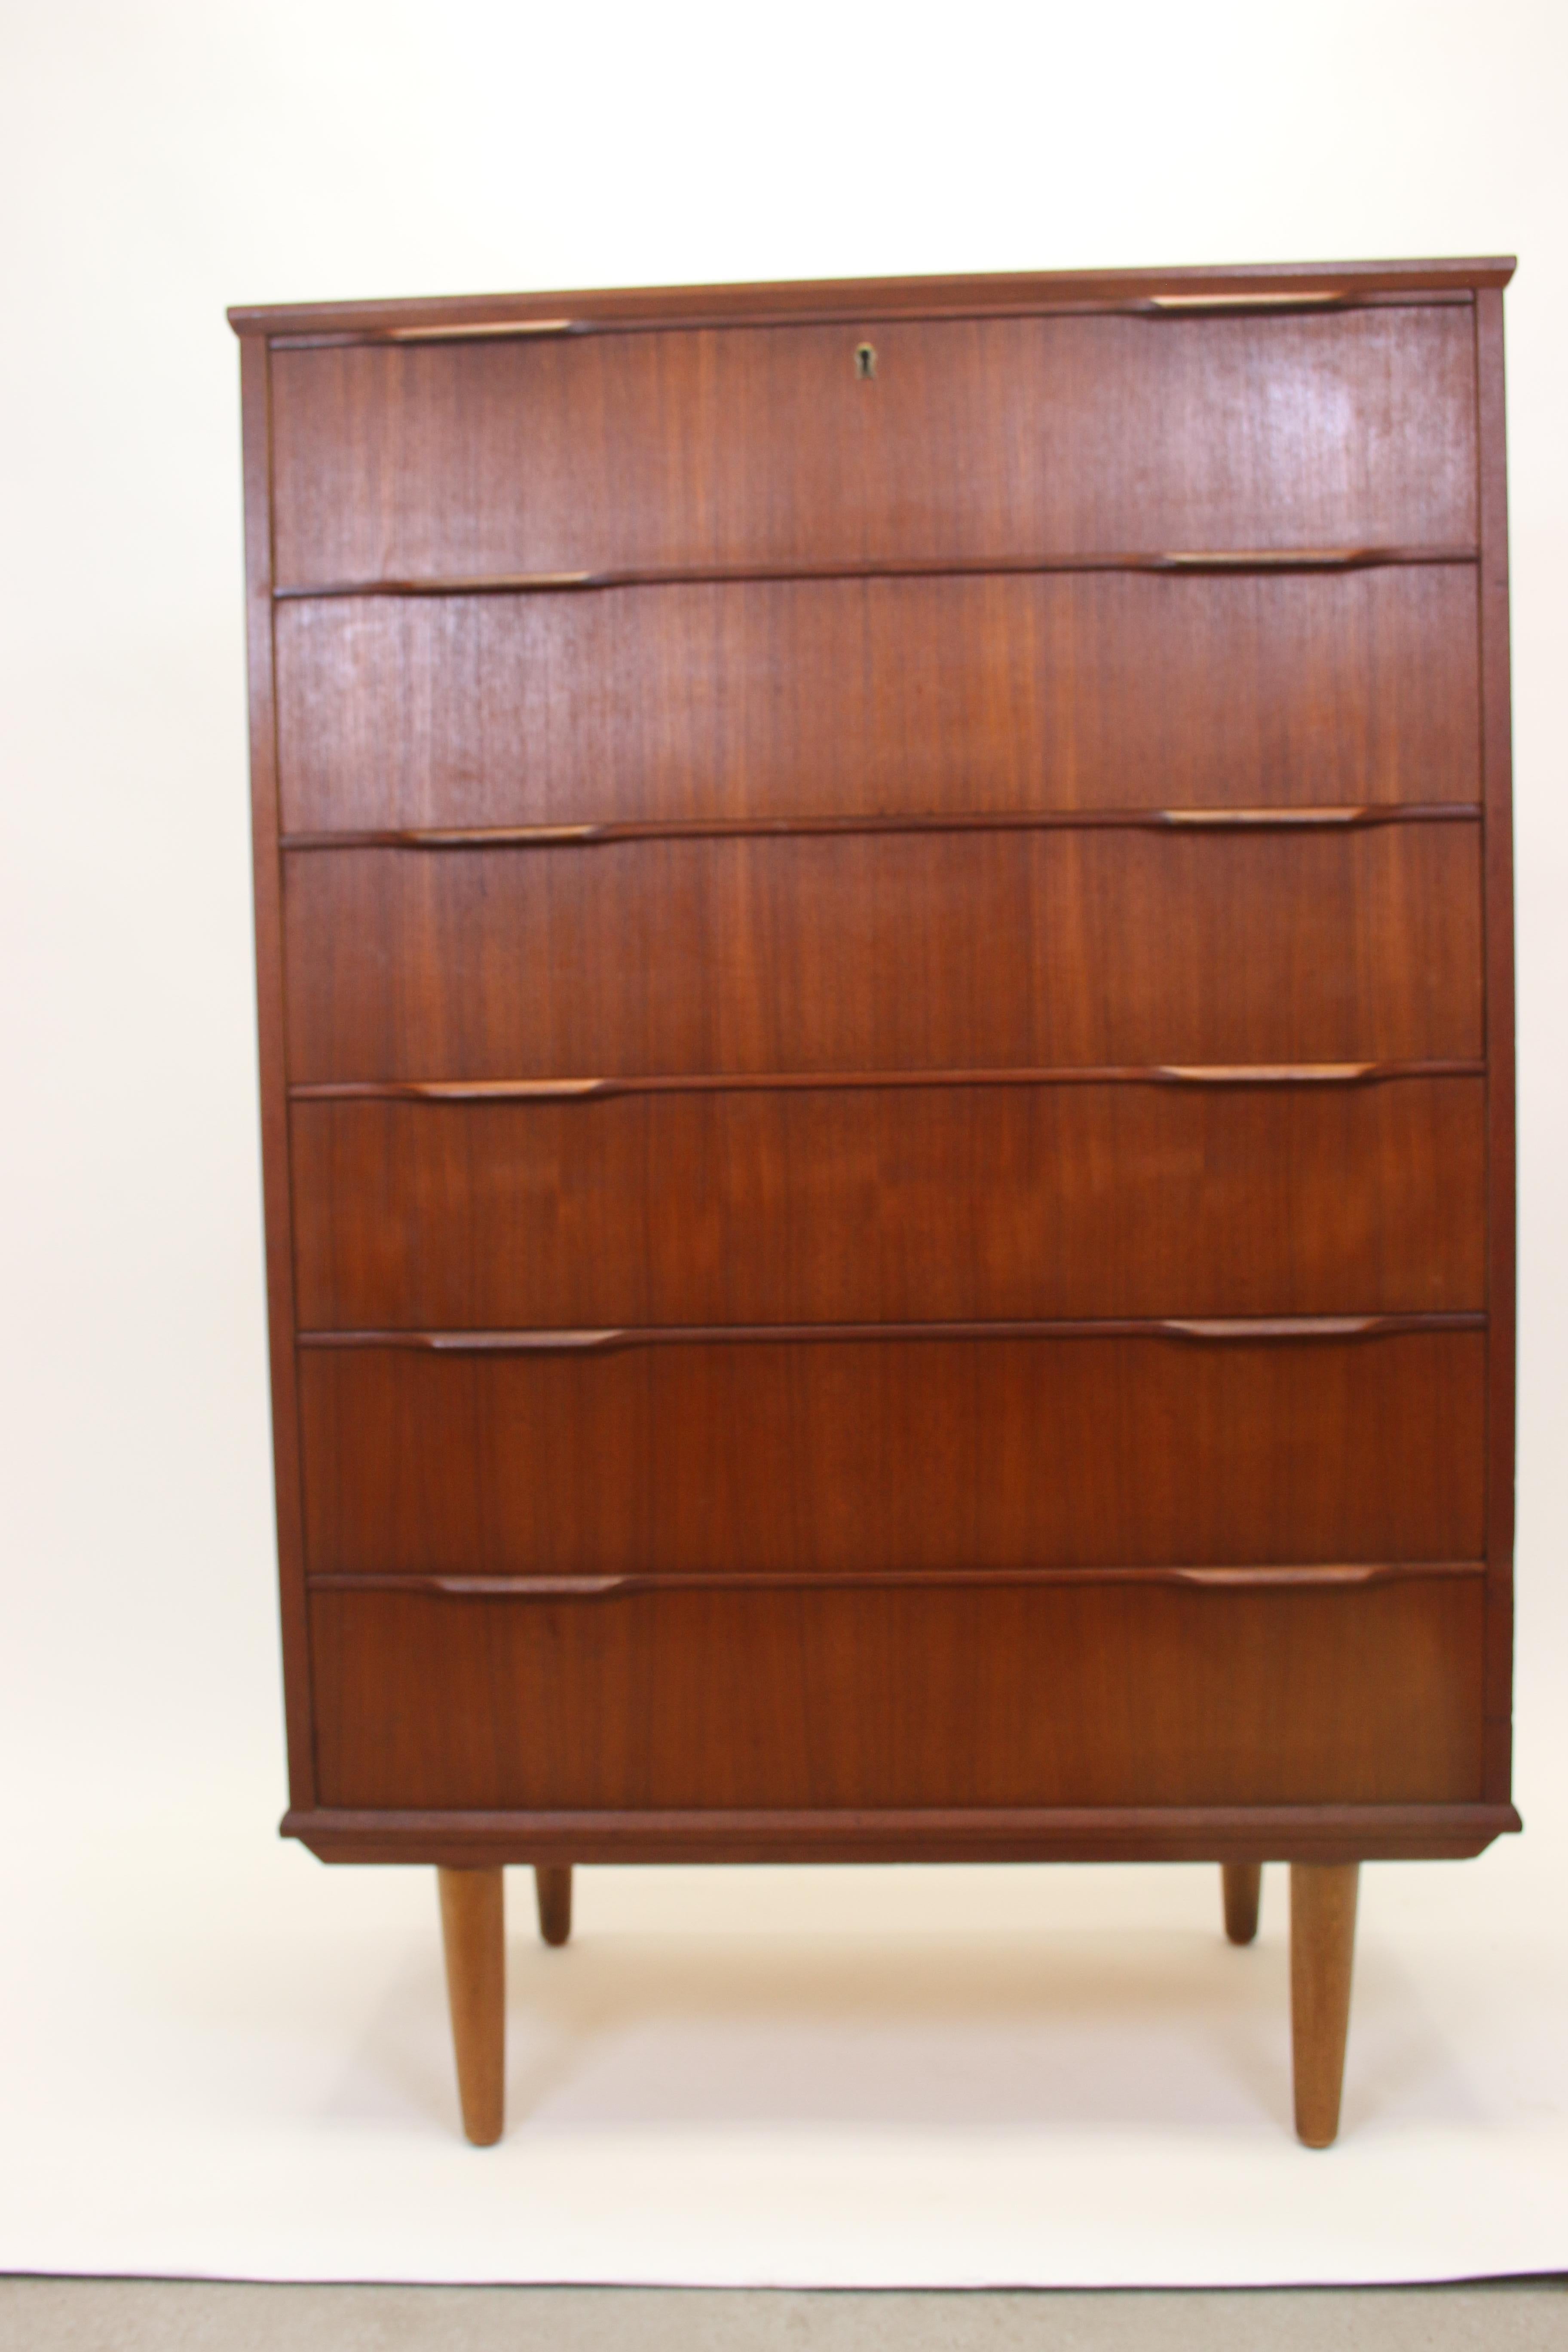 Mid-20th Century Danish Teak Chest of Drawers with 6 Drawers